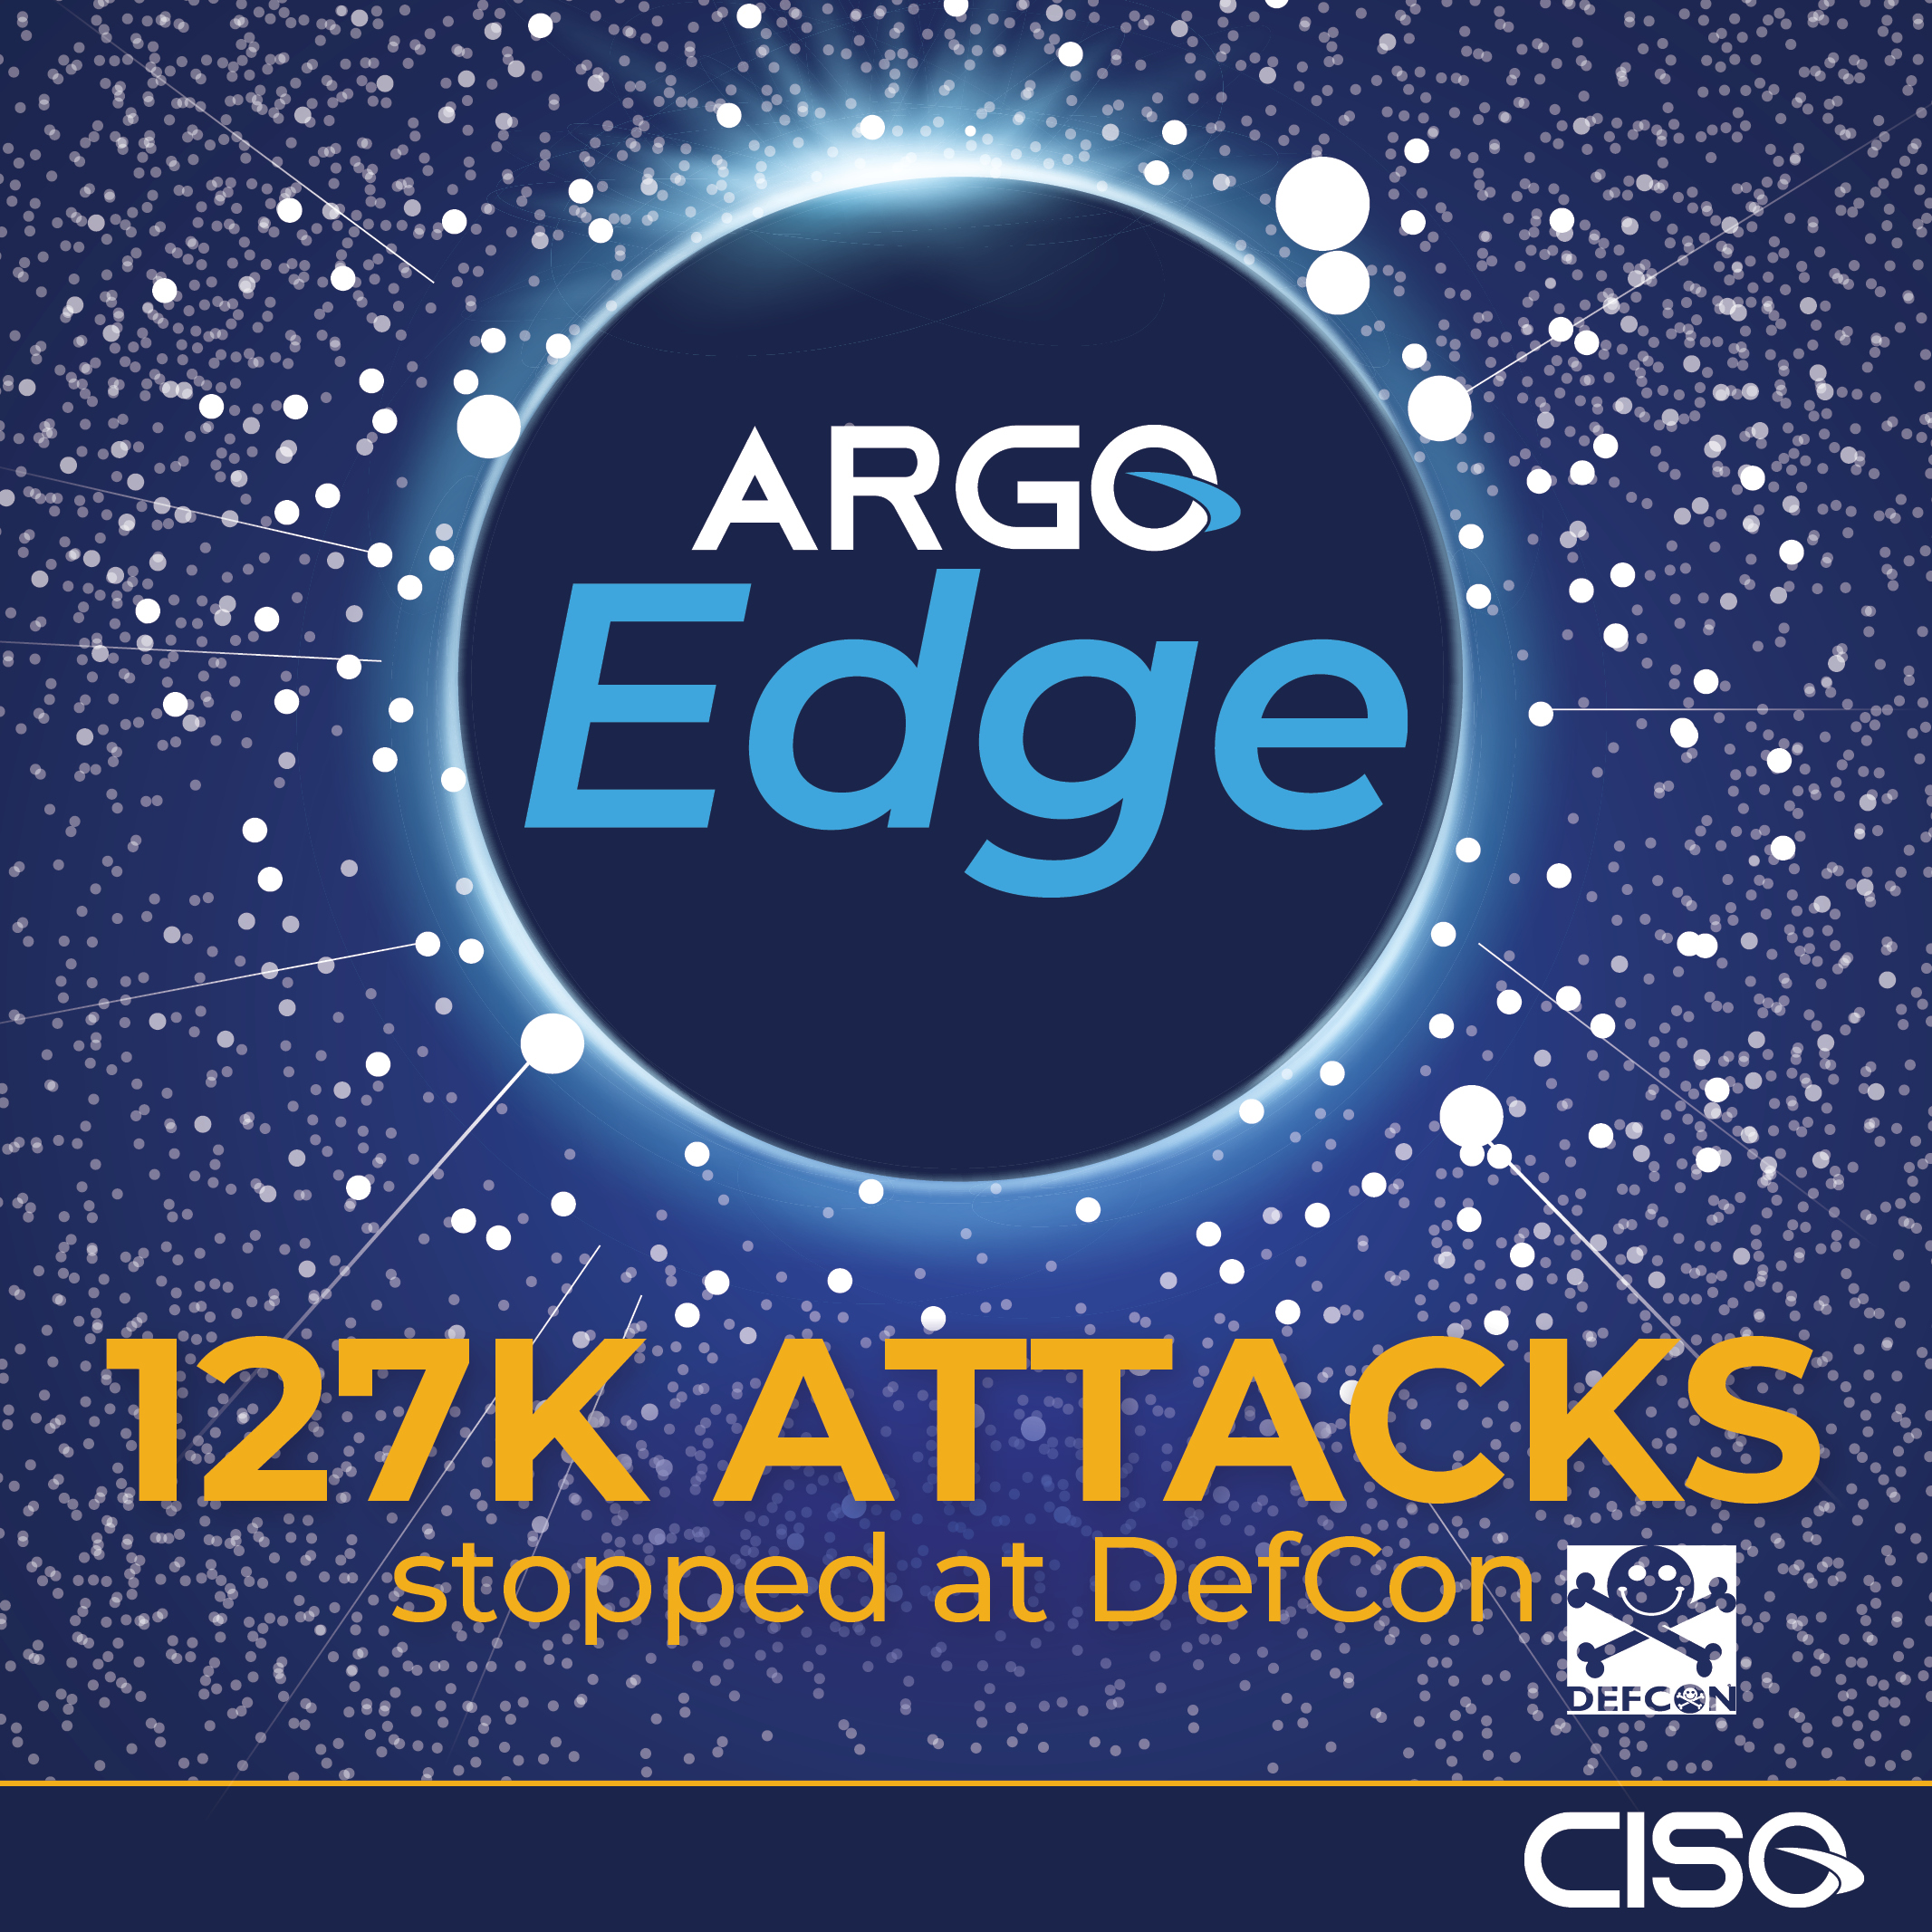 Argo Edge from CISO Global Successfully Sustains More than 125,000 Cyberattacks at DEF CON